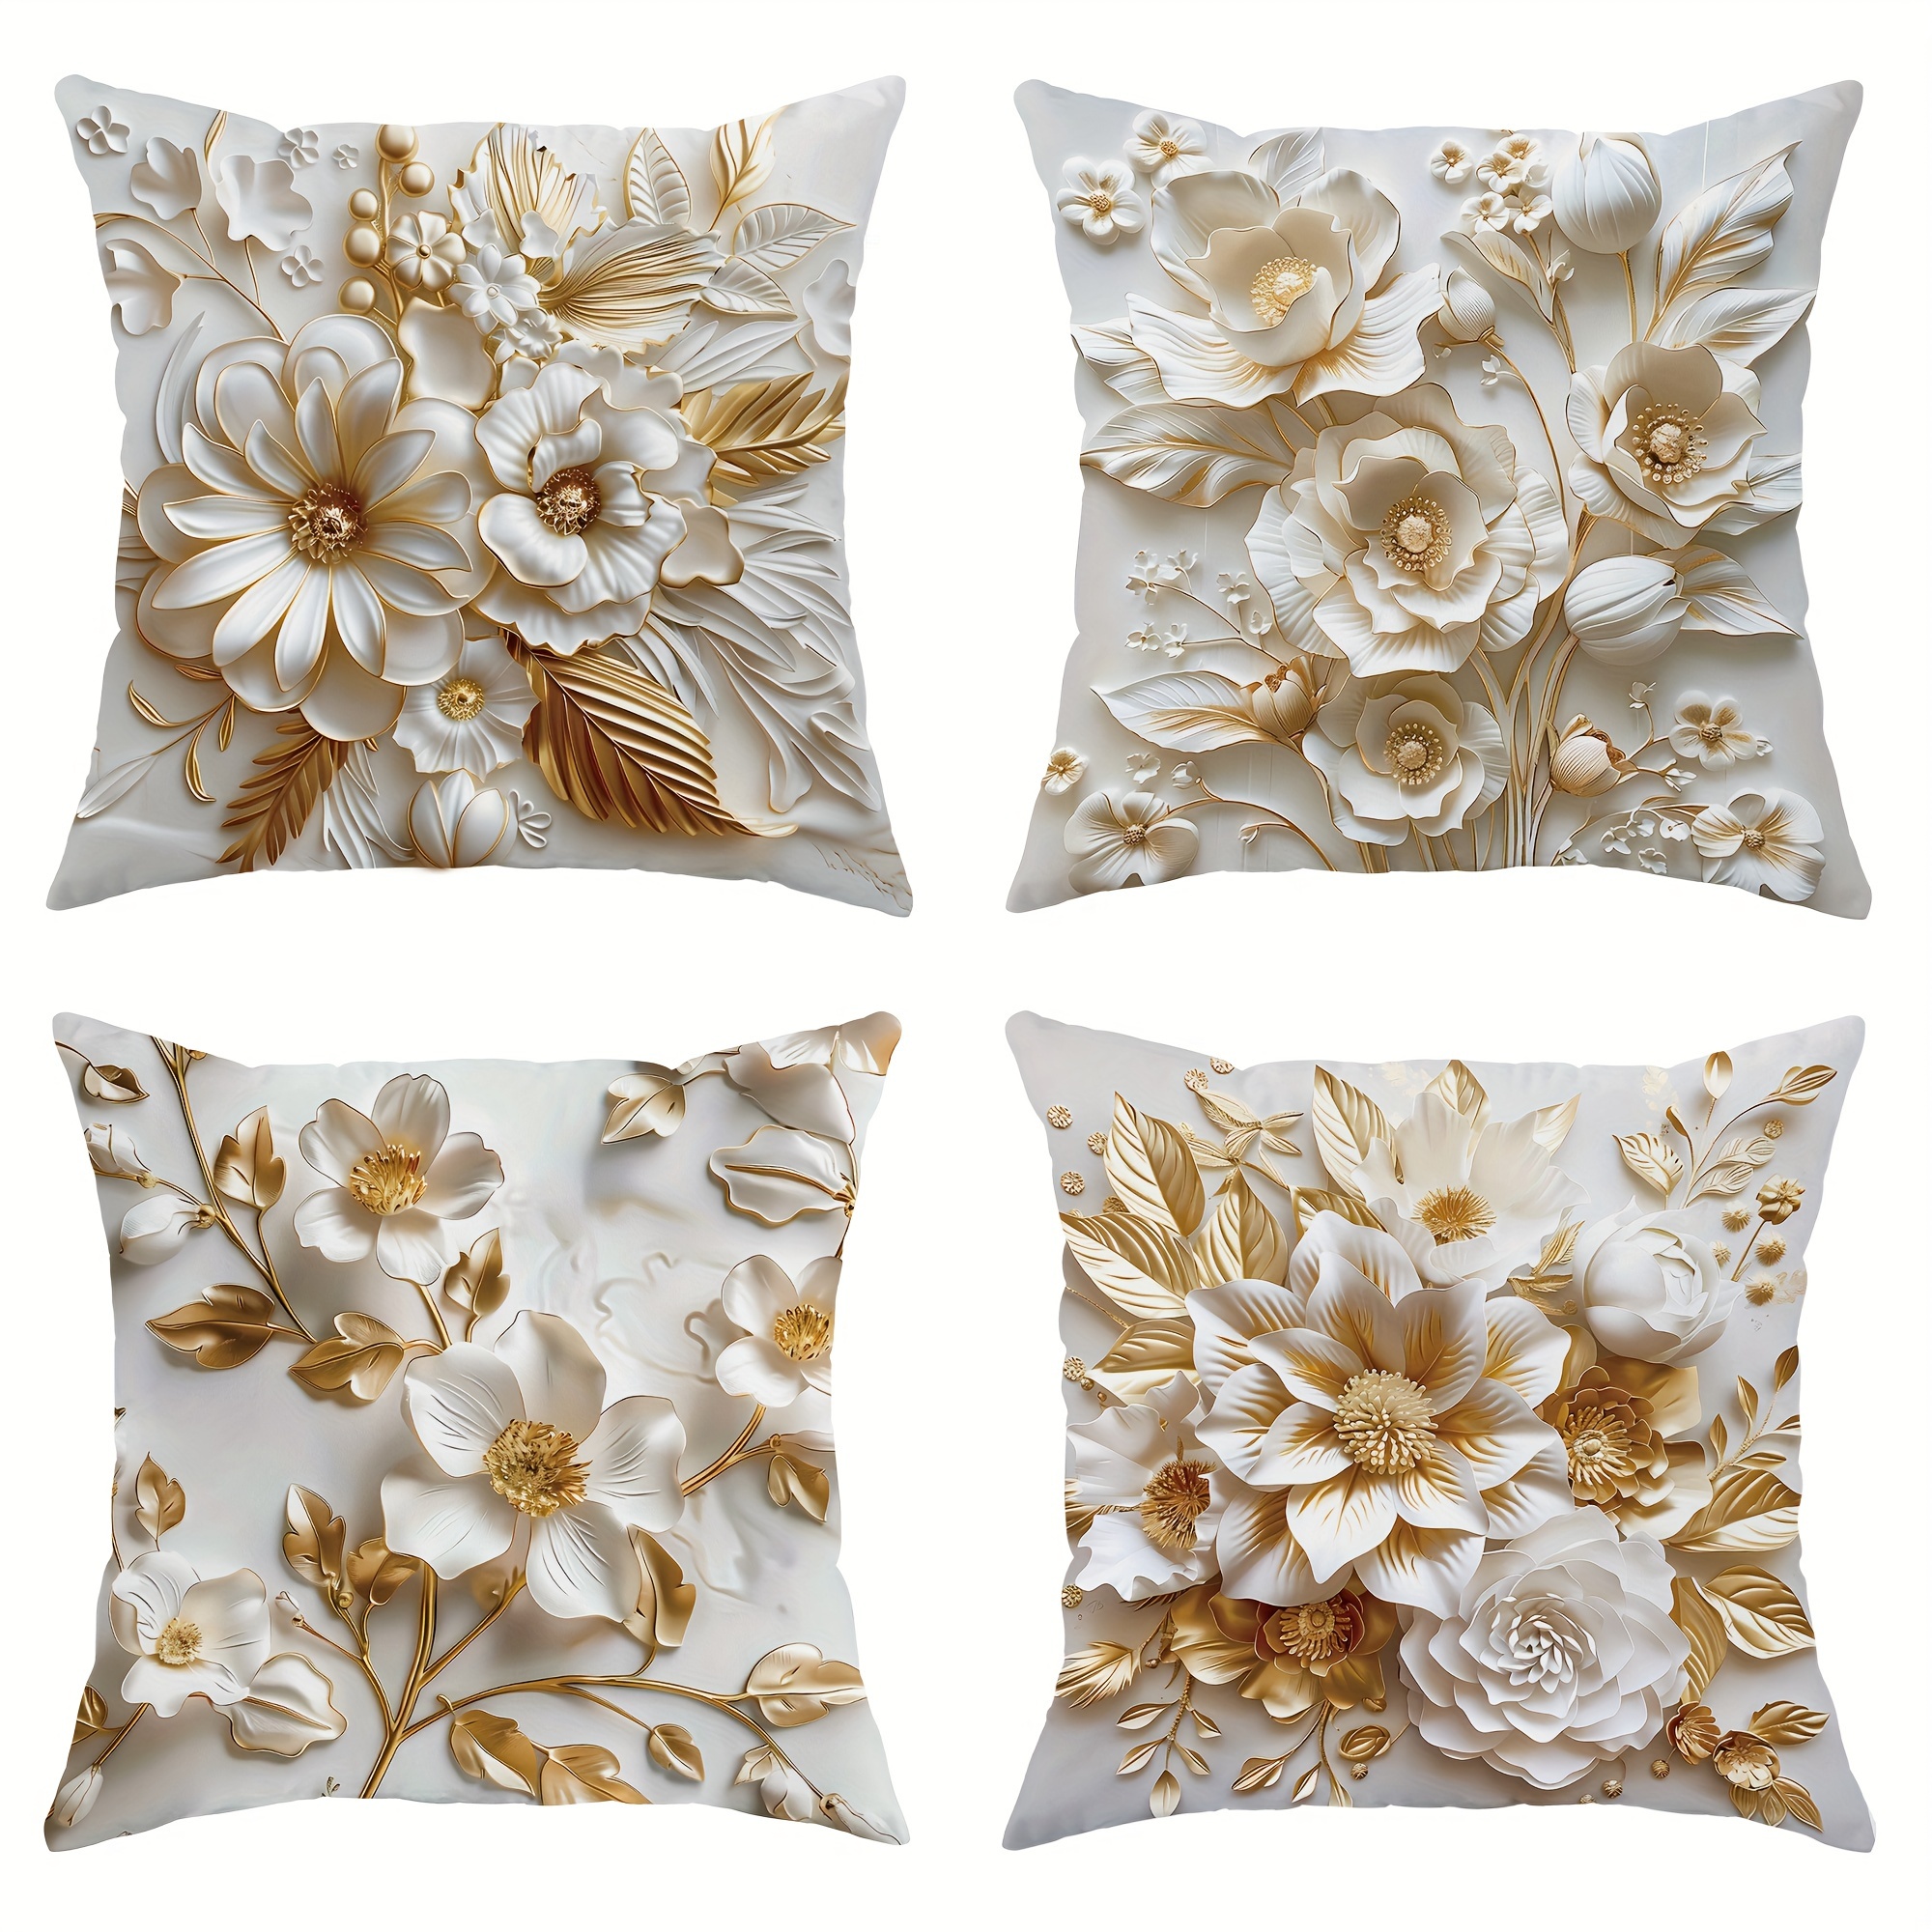 

4pcs, Velvet Throw Pillow Covers 3d Floral Gorgeous White Gilt Decorative Pillow Covers 18*18 Inch Suitable For Summer And Autumn Living Room Bedroom Sofa Bed Decoration